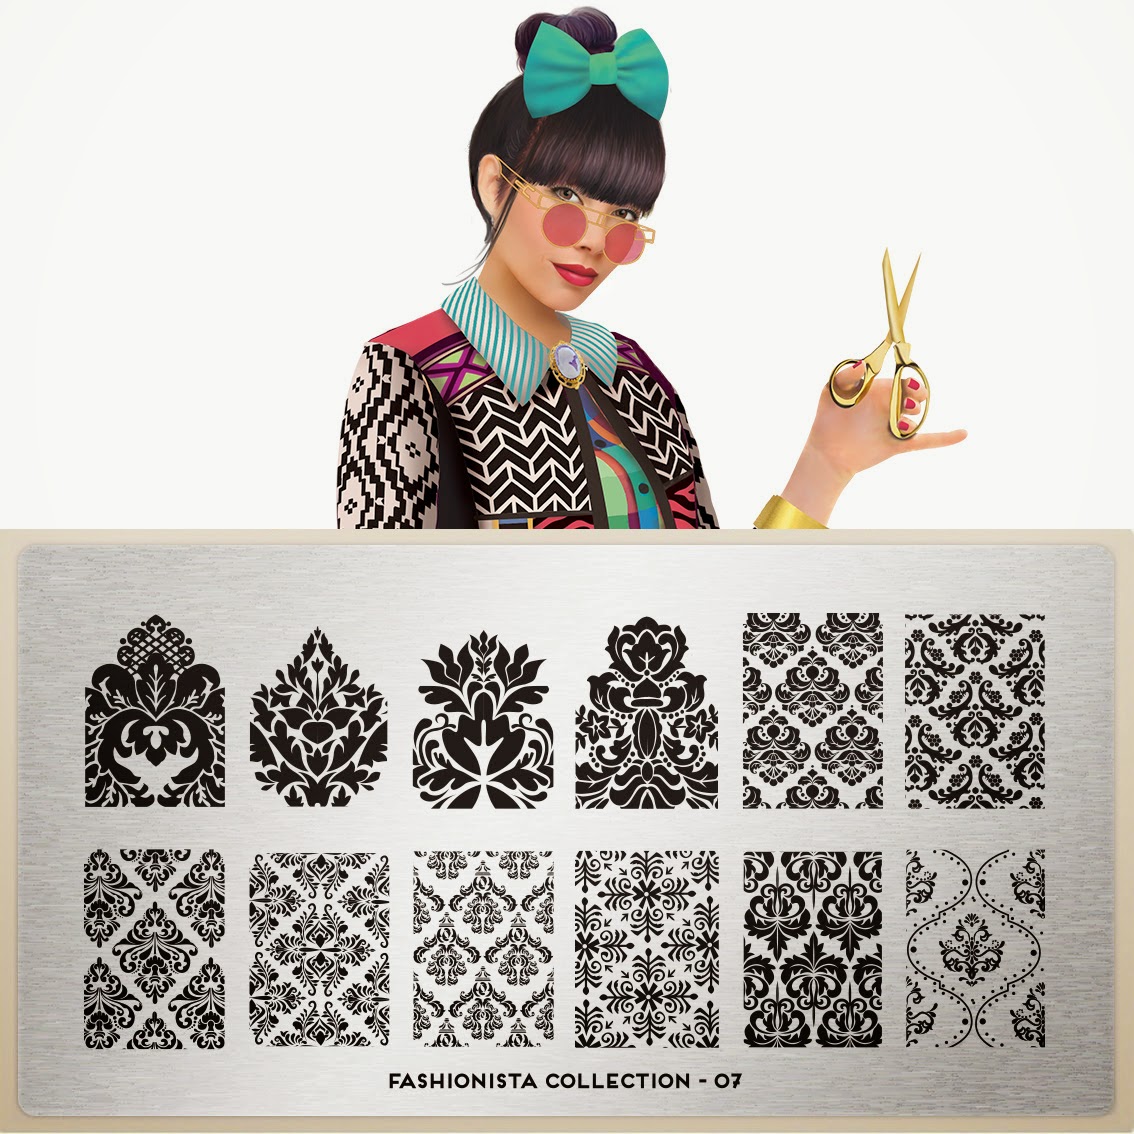 Lacquer Lockdown - MoYou London Fashionista Collection, new stamping plates 2014, new nail art stamping plates 2014, nail art stamping plates nail art stamping blog, new nail art image plates 2014, cute nail art ideas, diy nail art, stamping, MoYou London